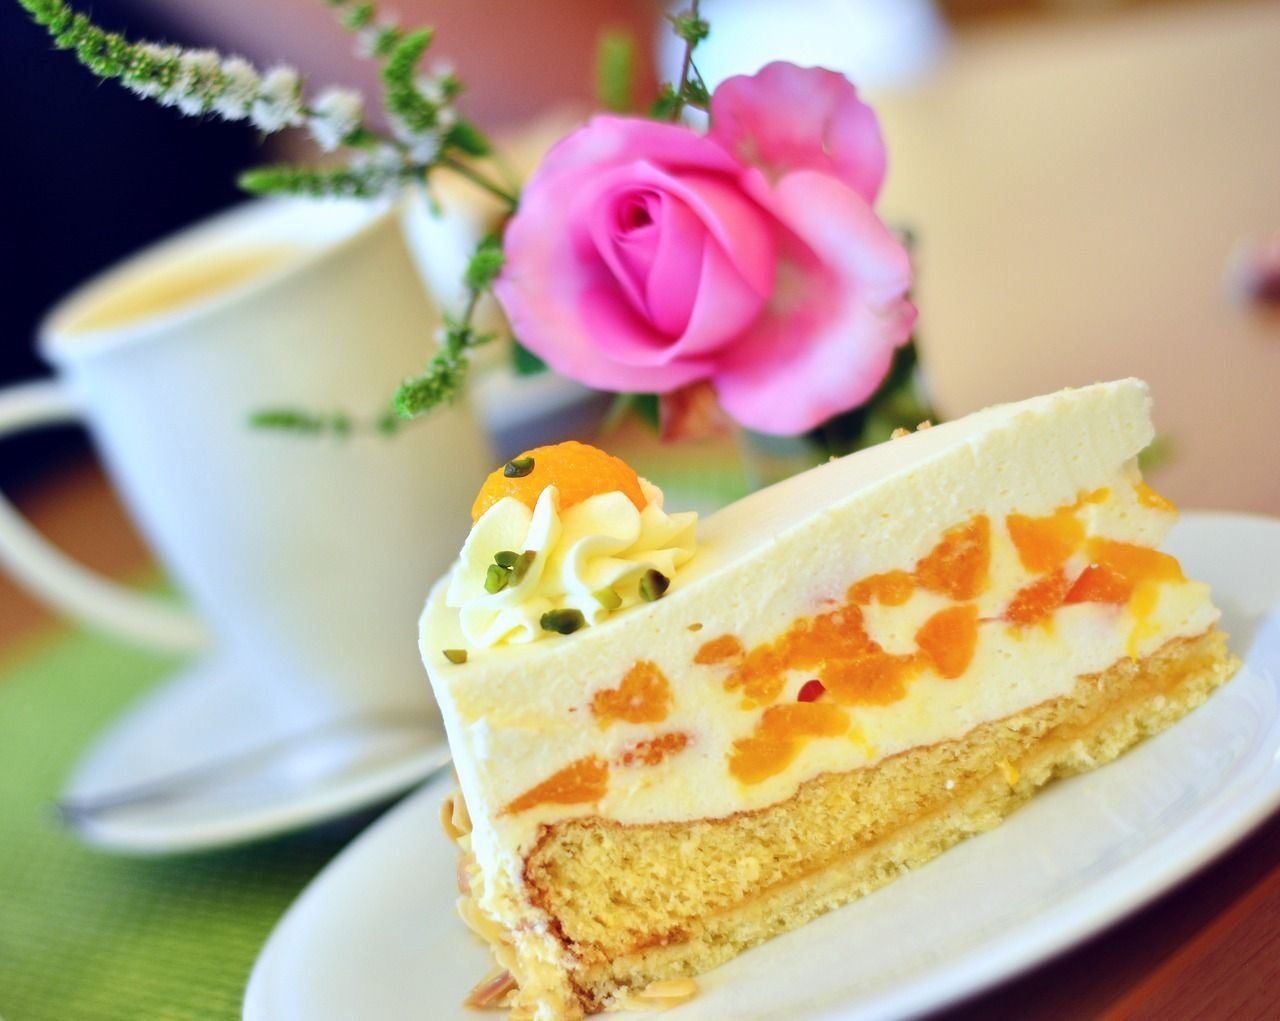 Where are the best custom-made cakes in Omsk in 2020